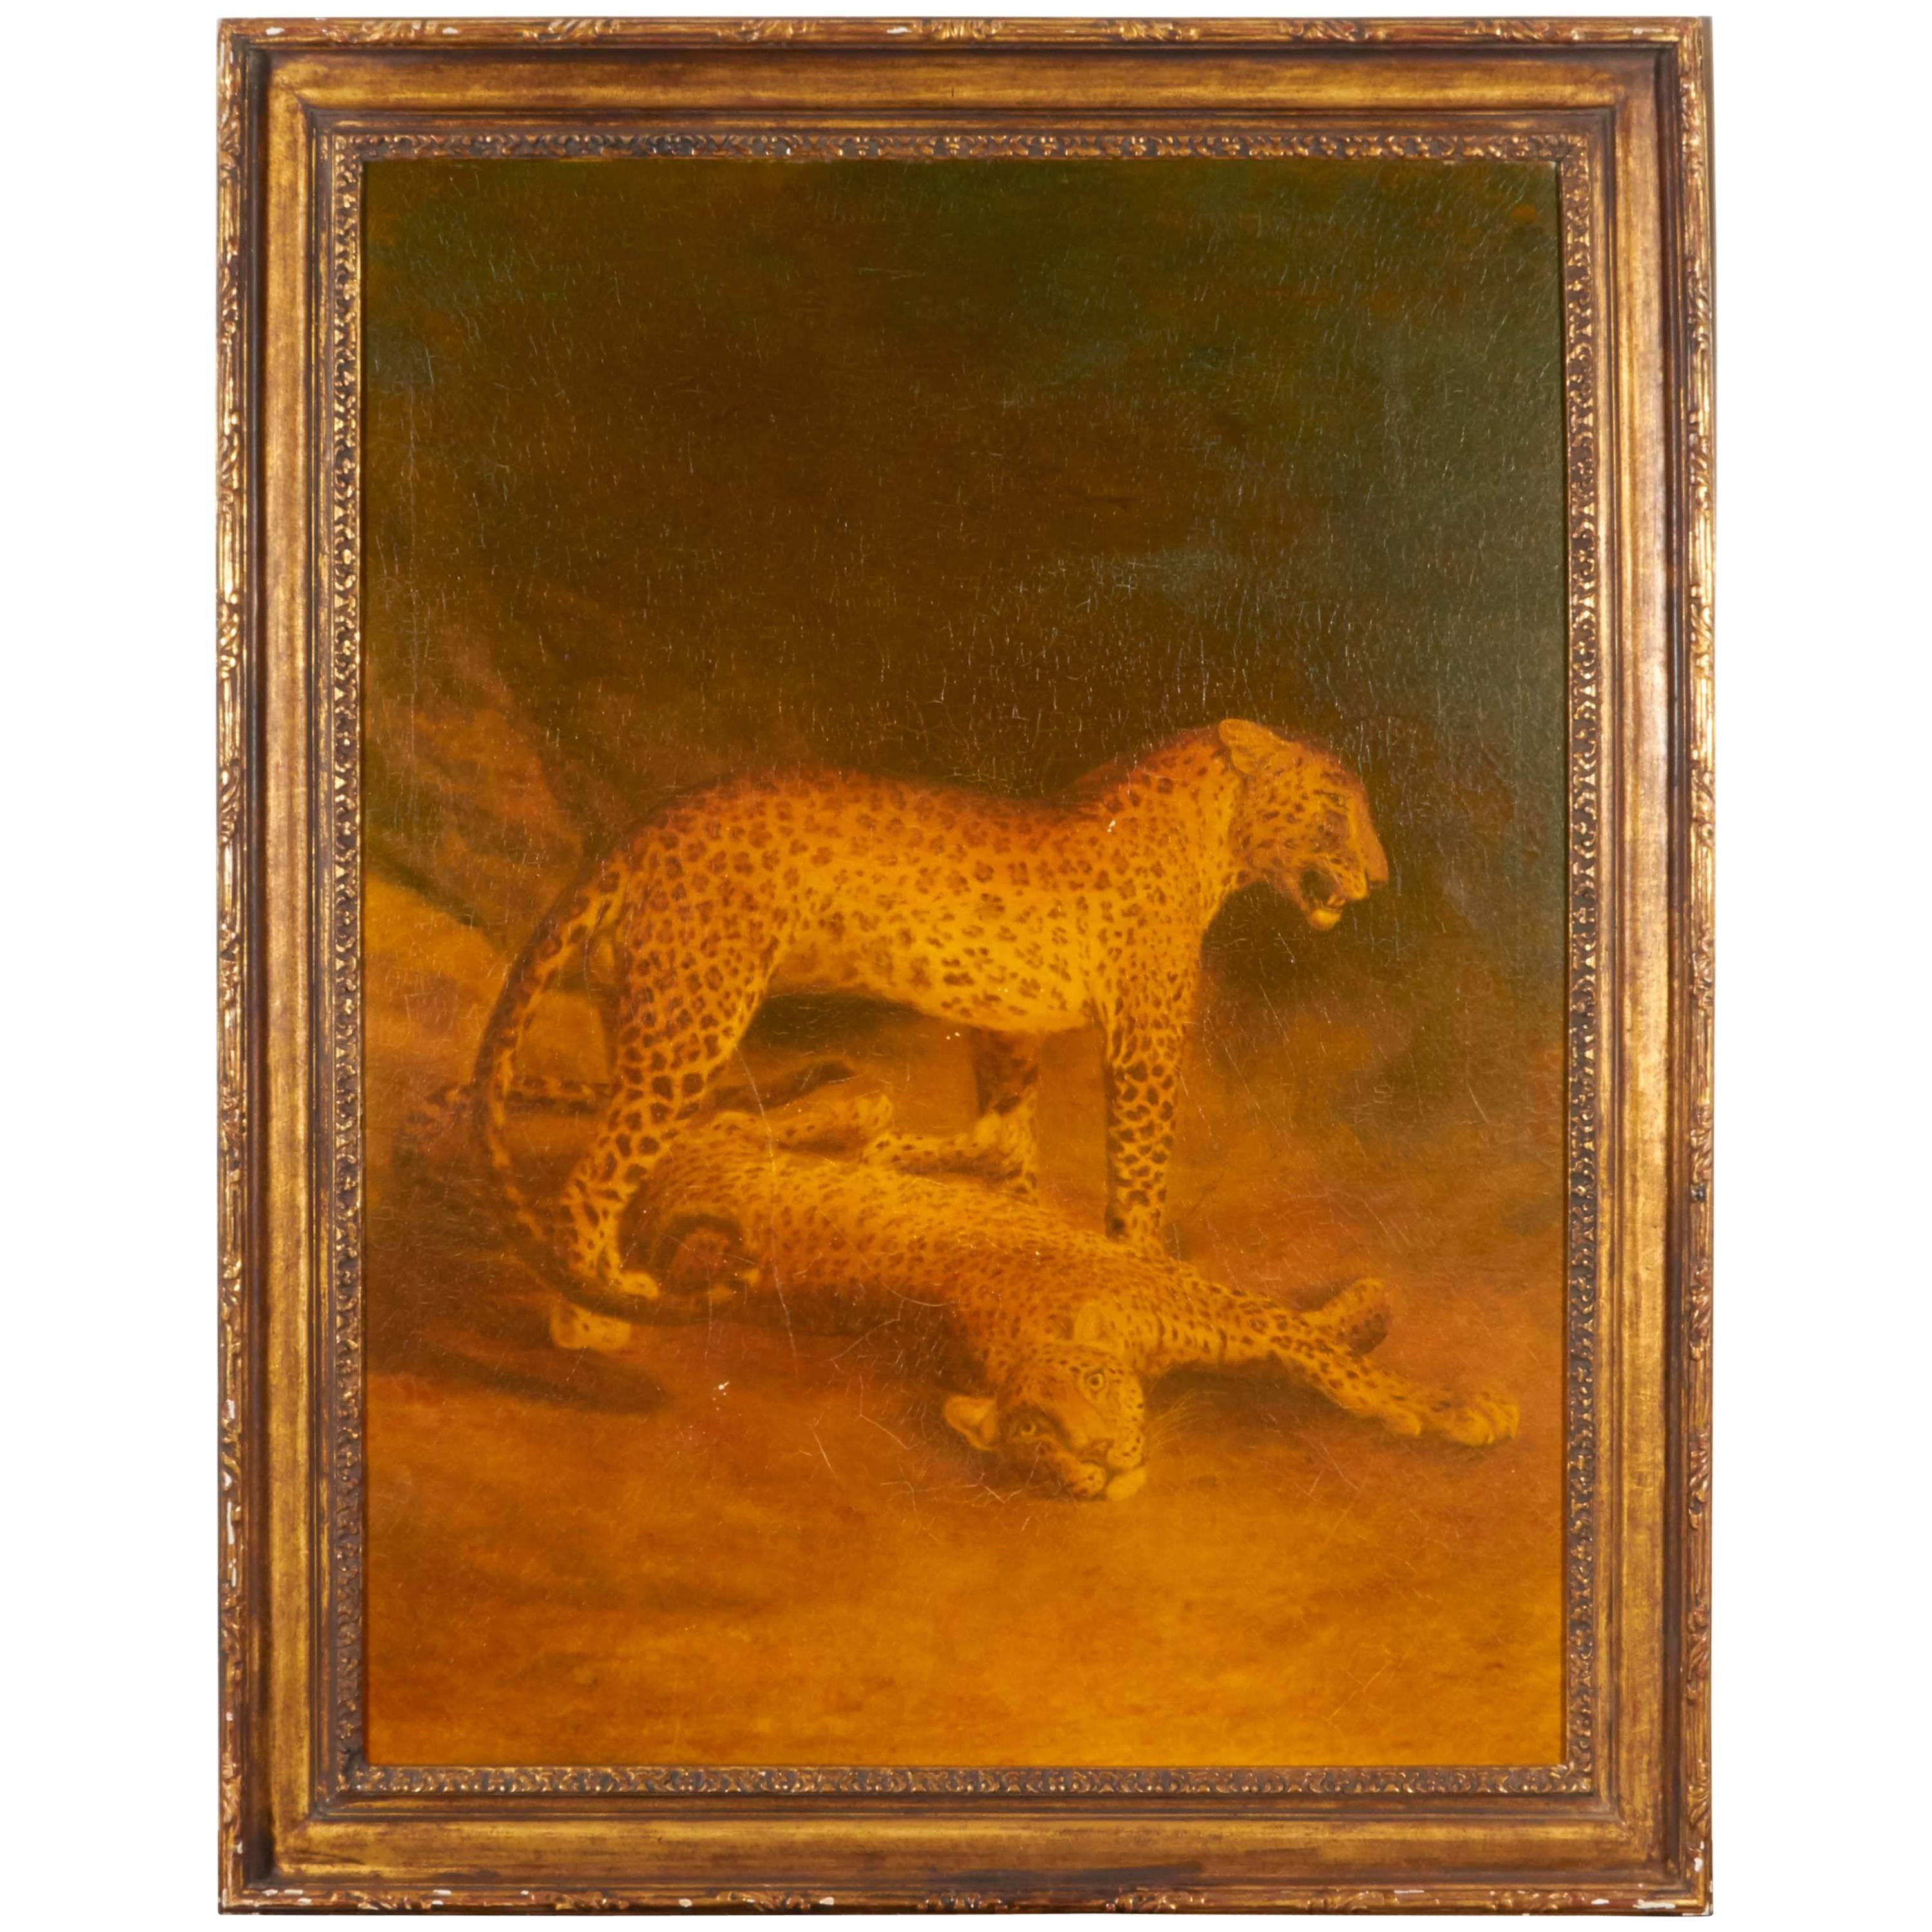 Contemporary Oil on Canvas Study of Jaguars For Sale